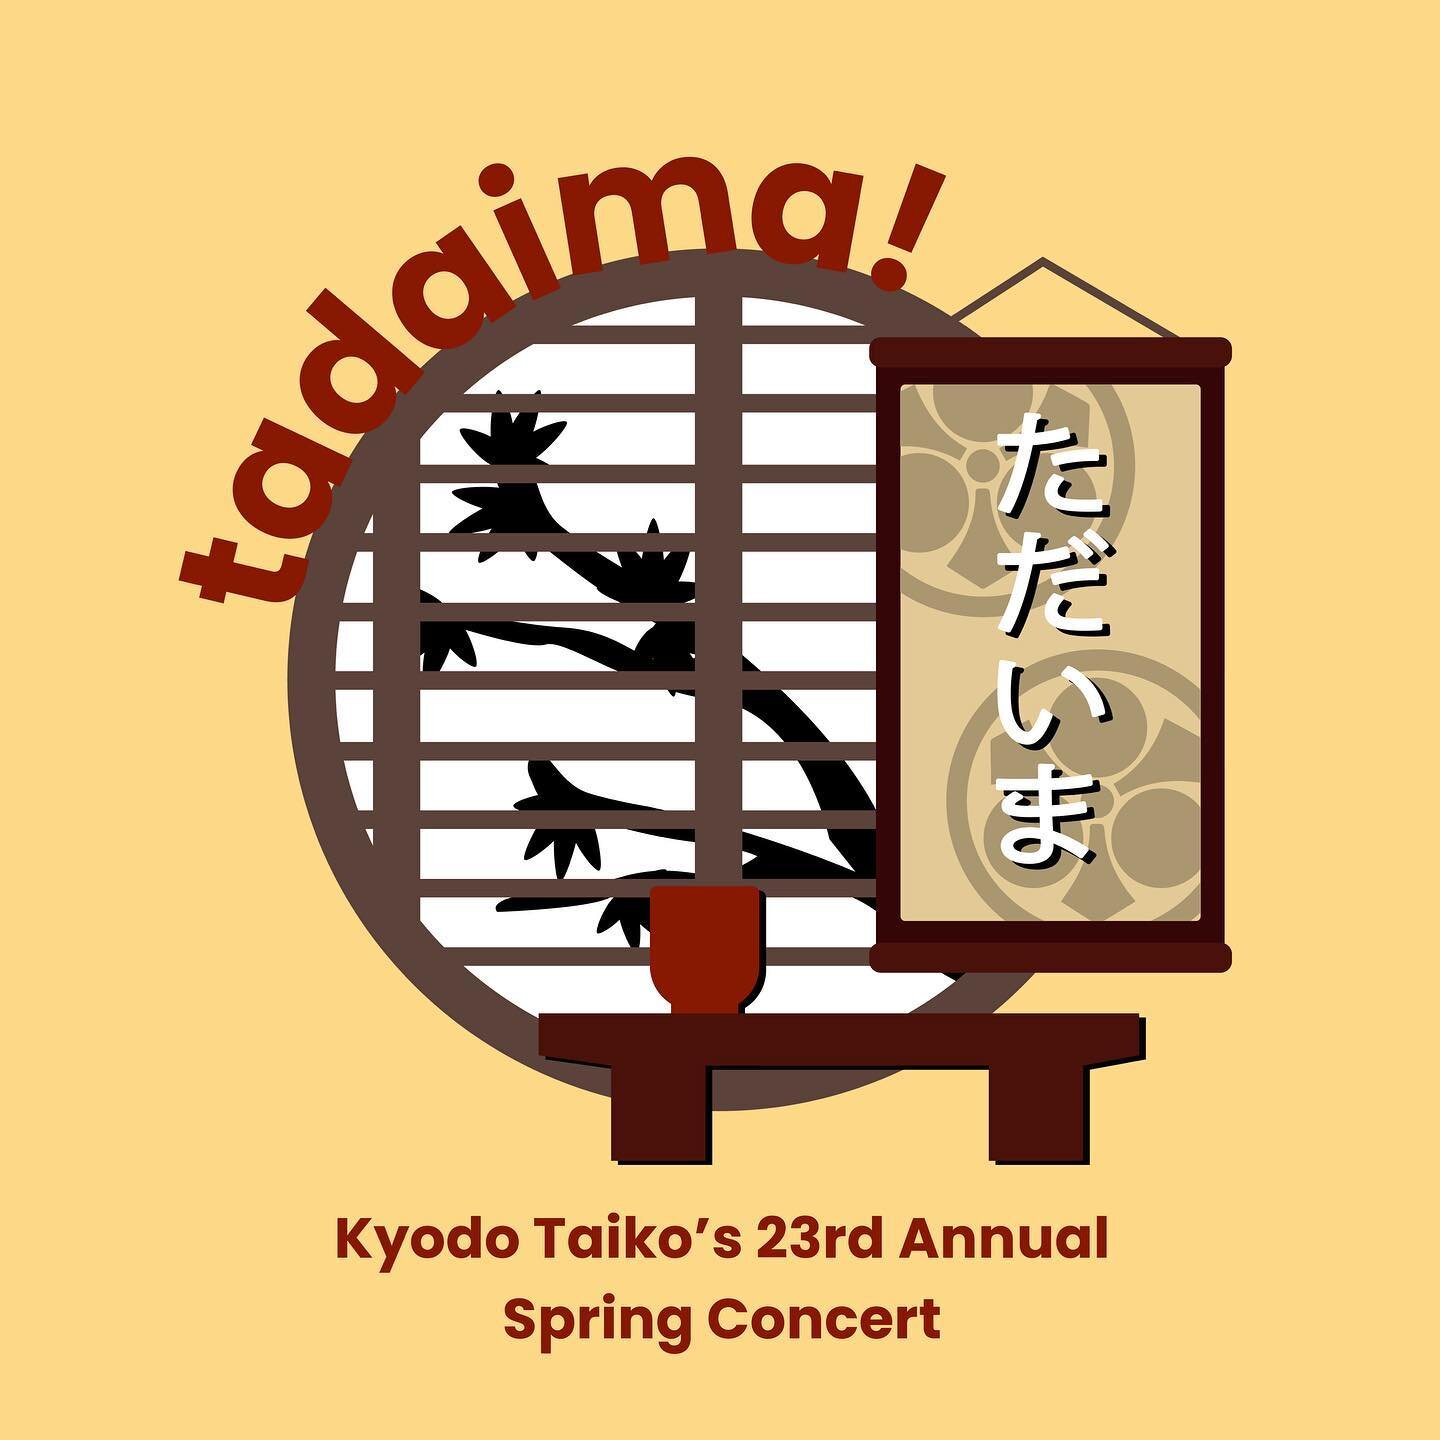 Kyodo is excited to present our 23rd Annual Spring Concert, Tadaima! (ただいま!)! 🎋

This year's concert is titled Tadaima! (ただいま!) which means &ldquo;Welcome home!&rdquo; in Japanese, marking our long awaited return to the stage after two years of virt